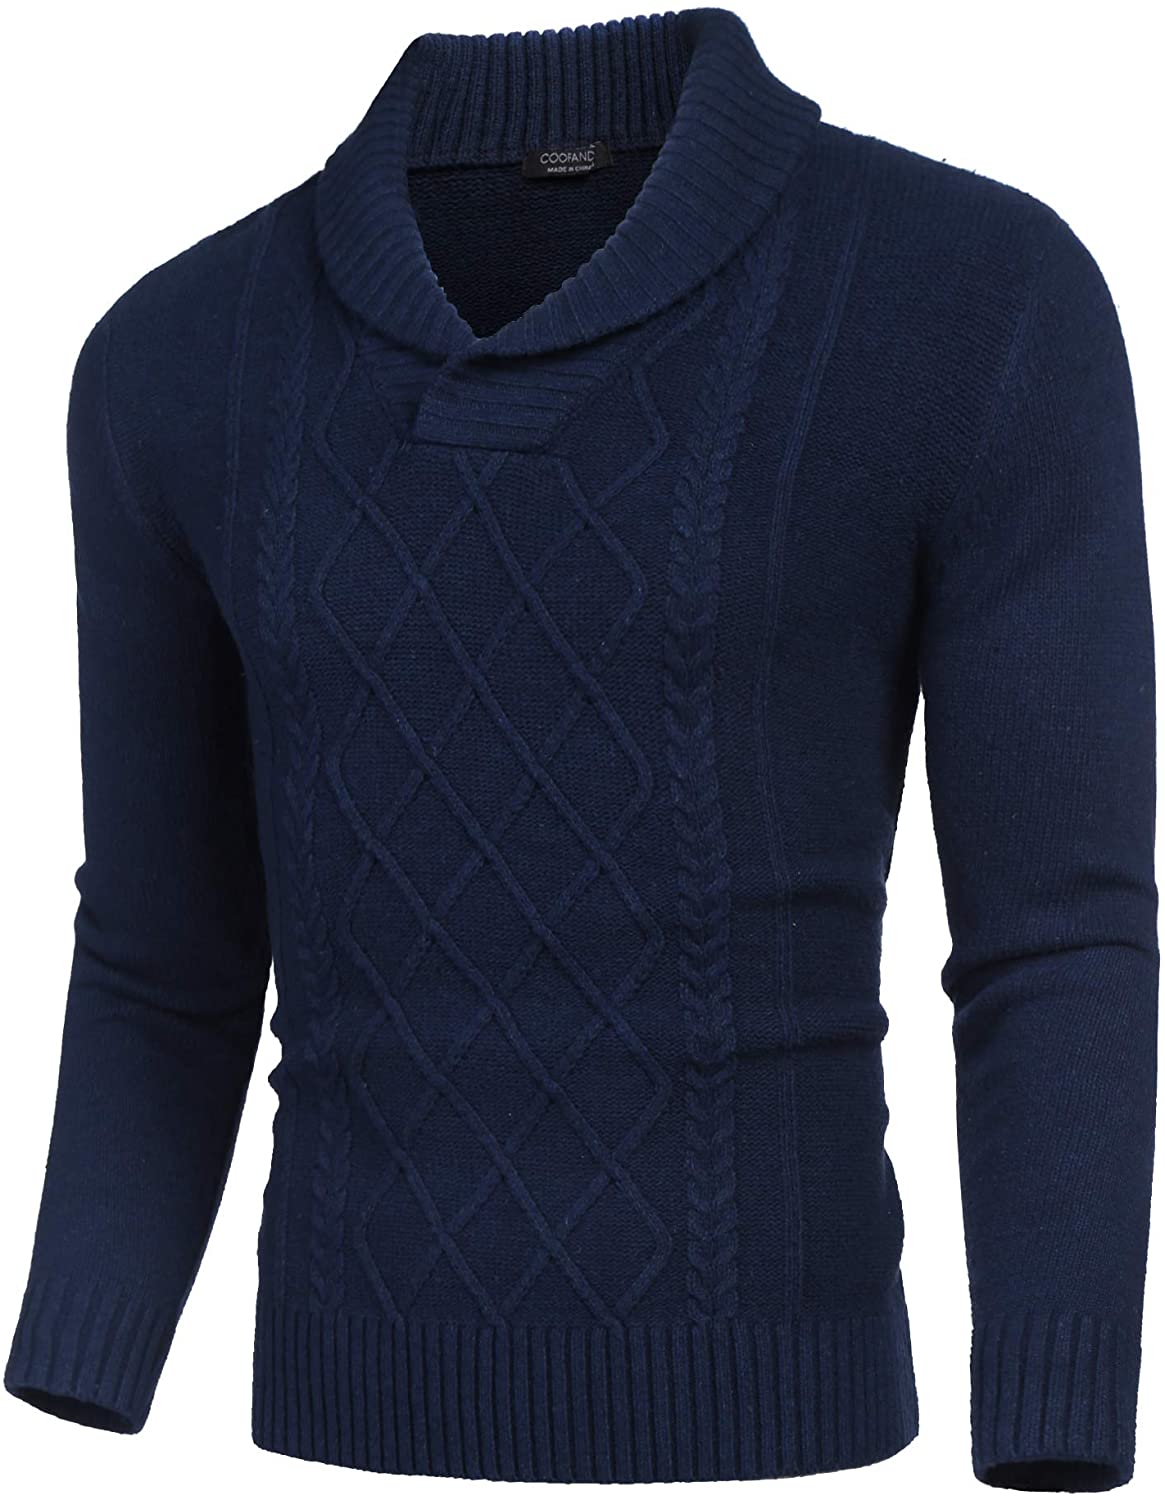 COOFANDY Men's Shawl Collar Sweaters V-Neck Cotton Relaxed Fit Cable ...